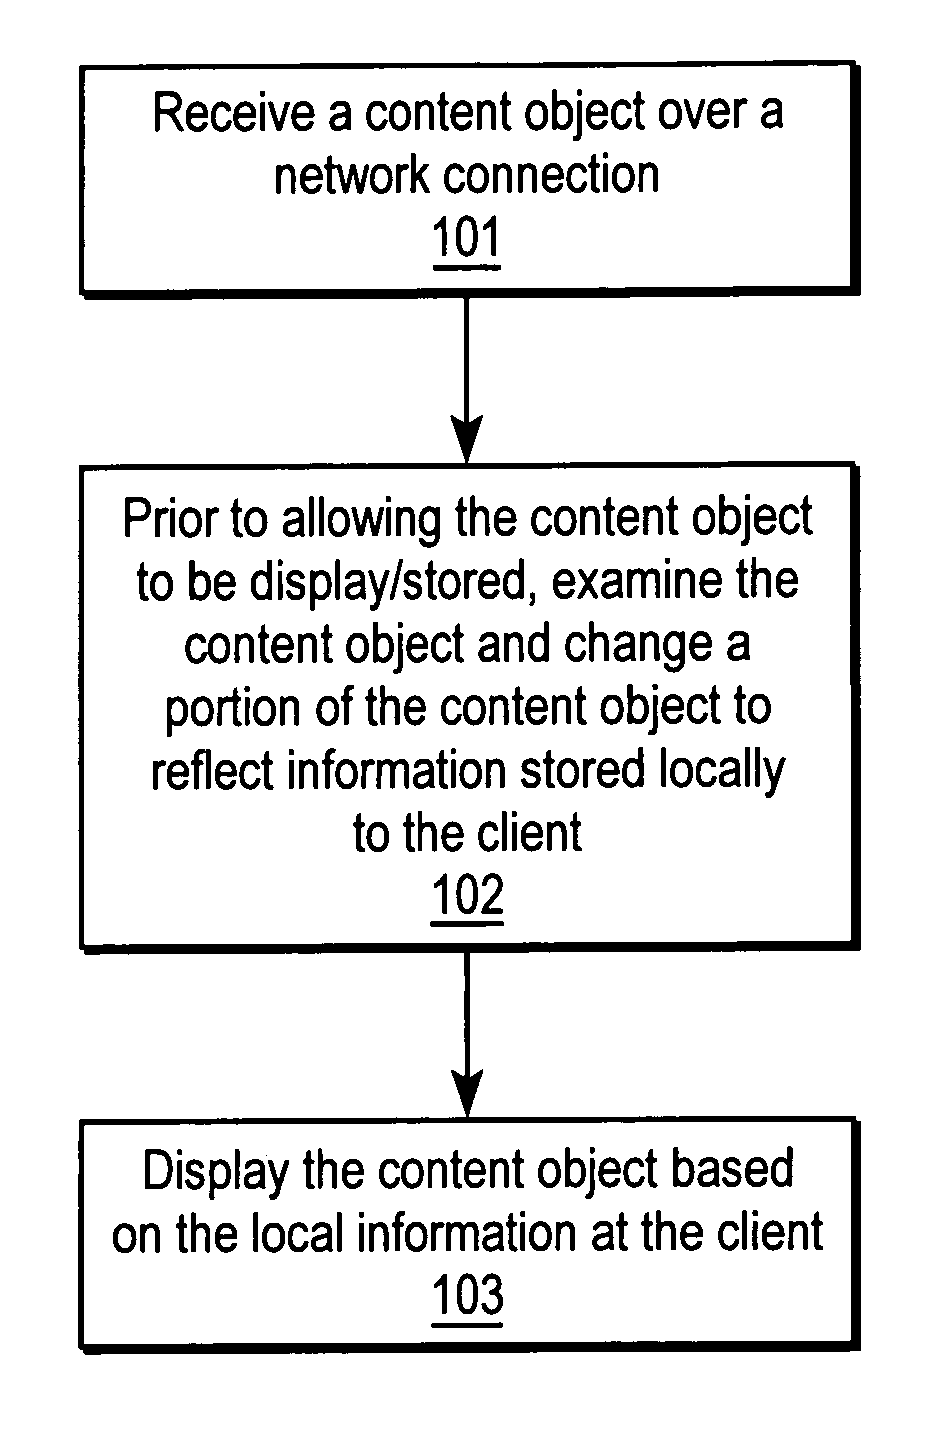 Manipulating content objects to control their display